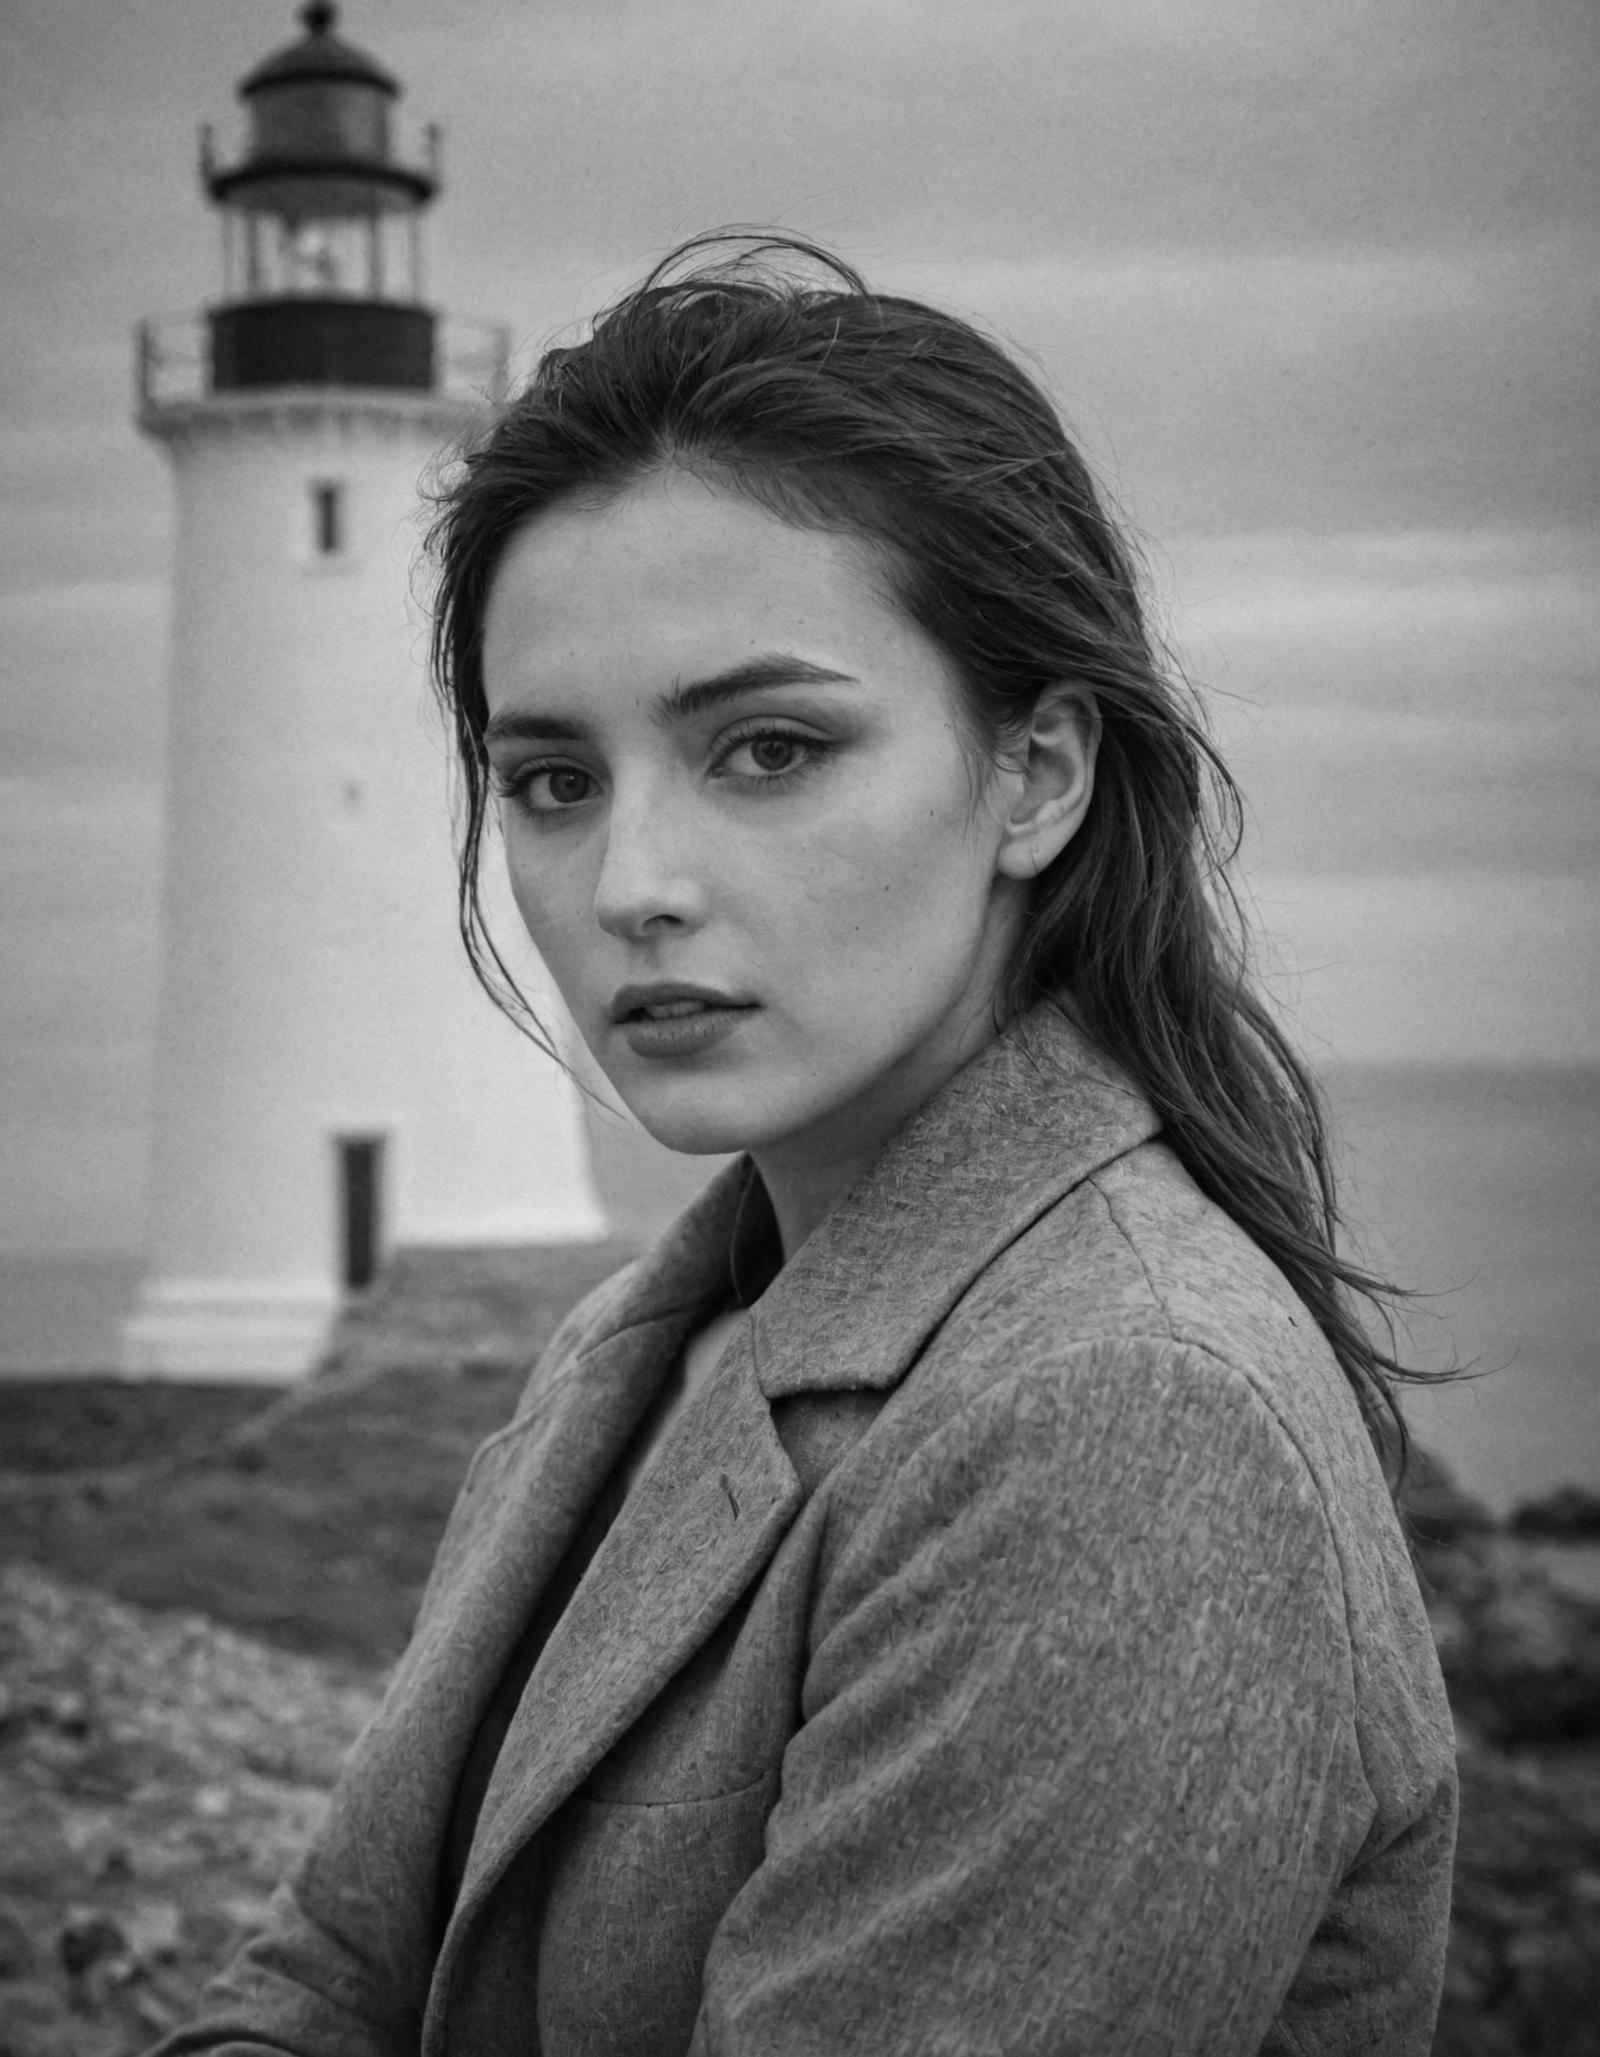 A woman in a grey jacket standing by a lighthouse.